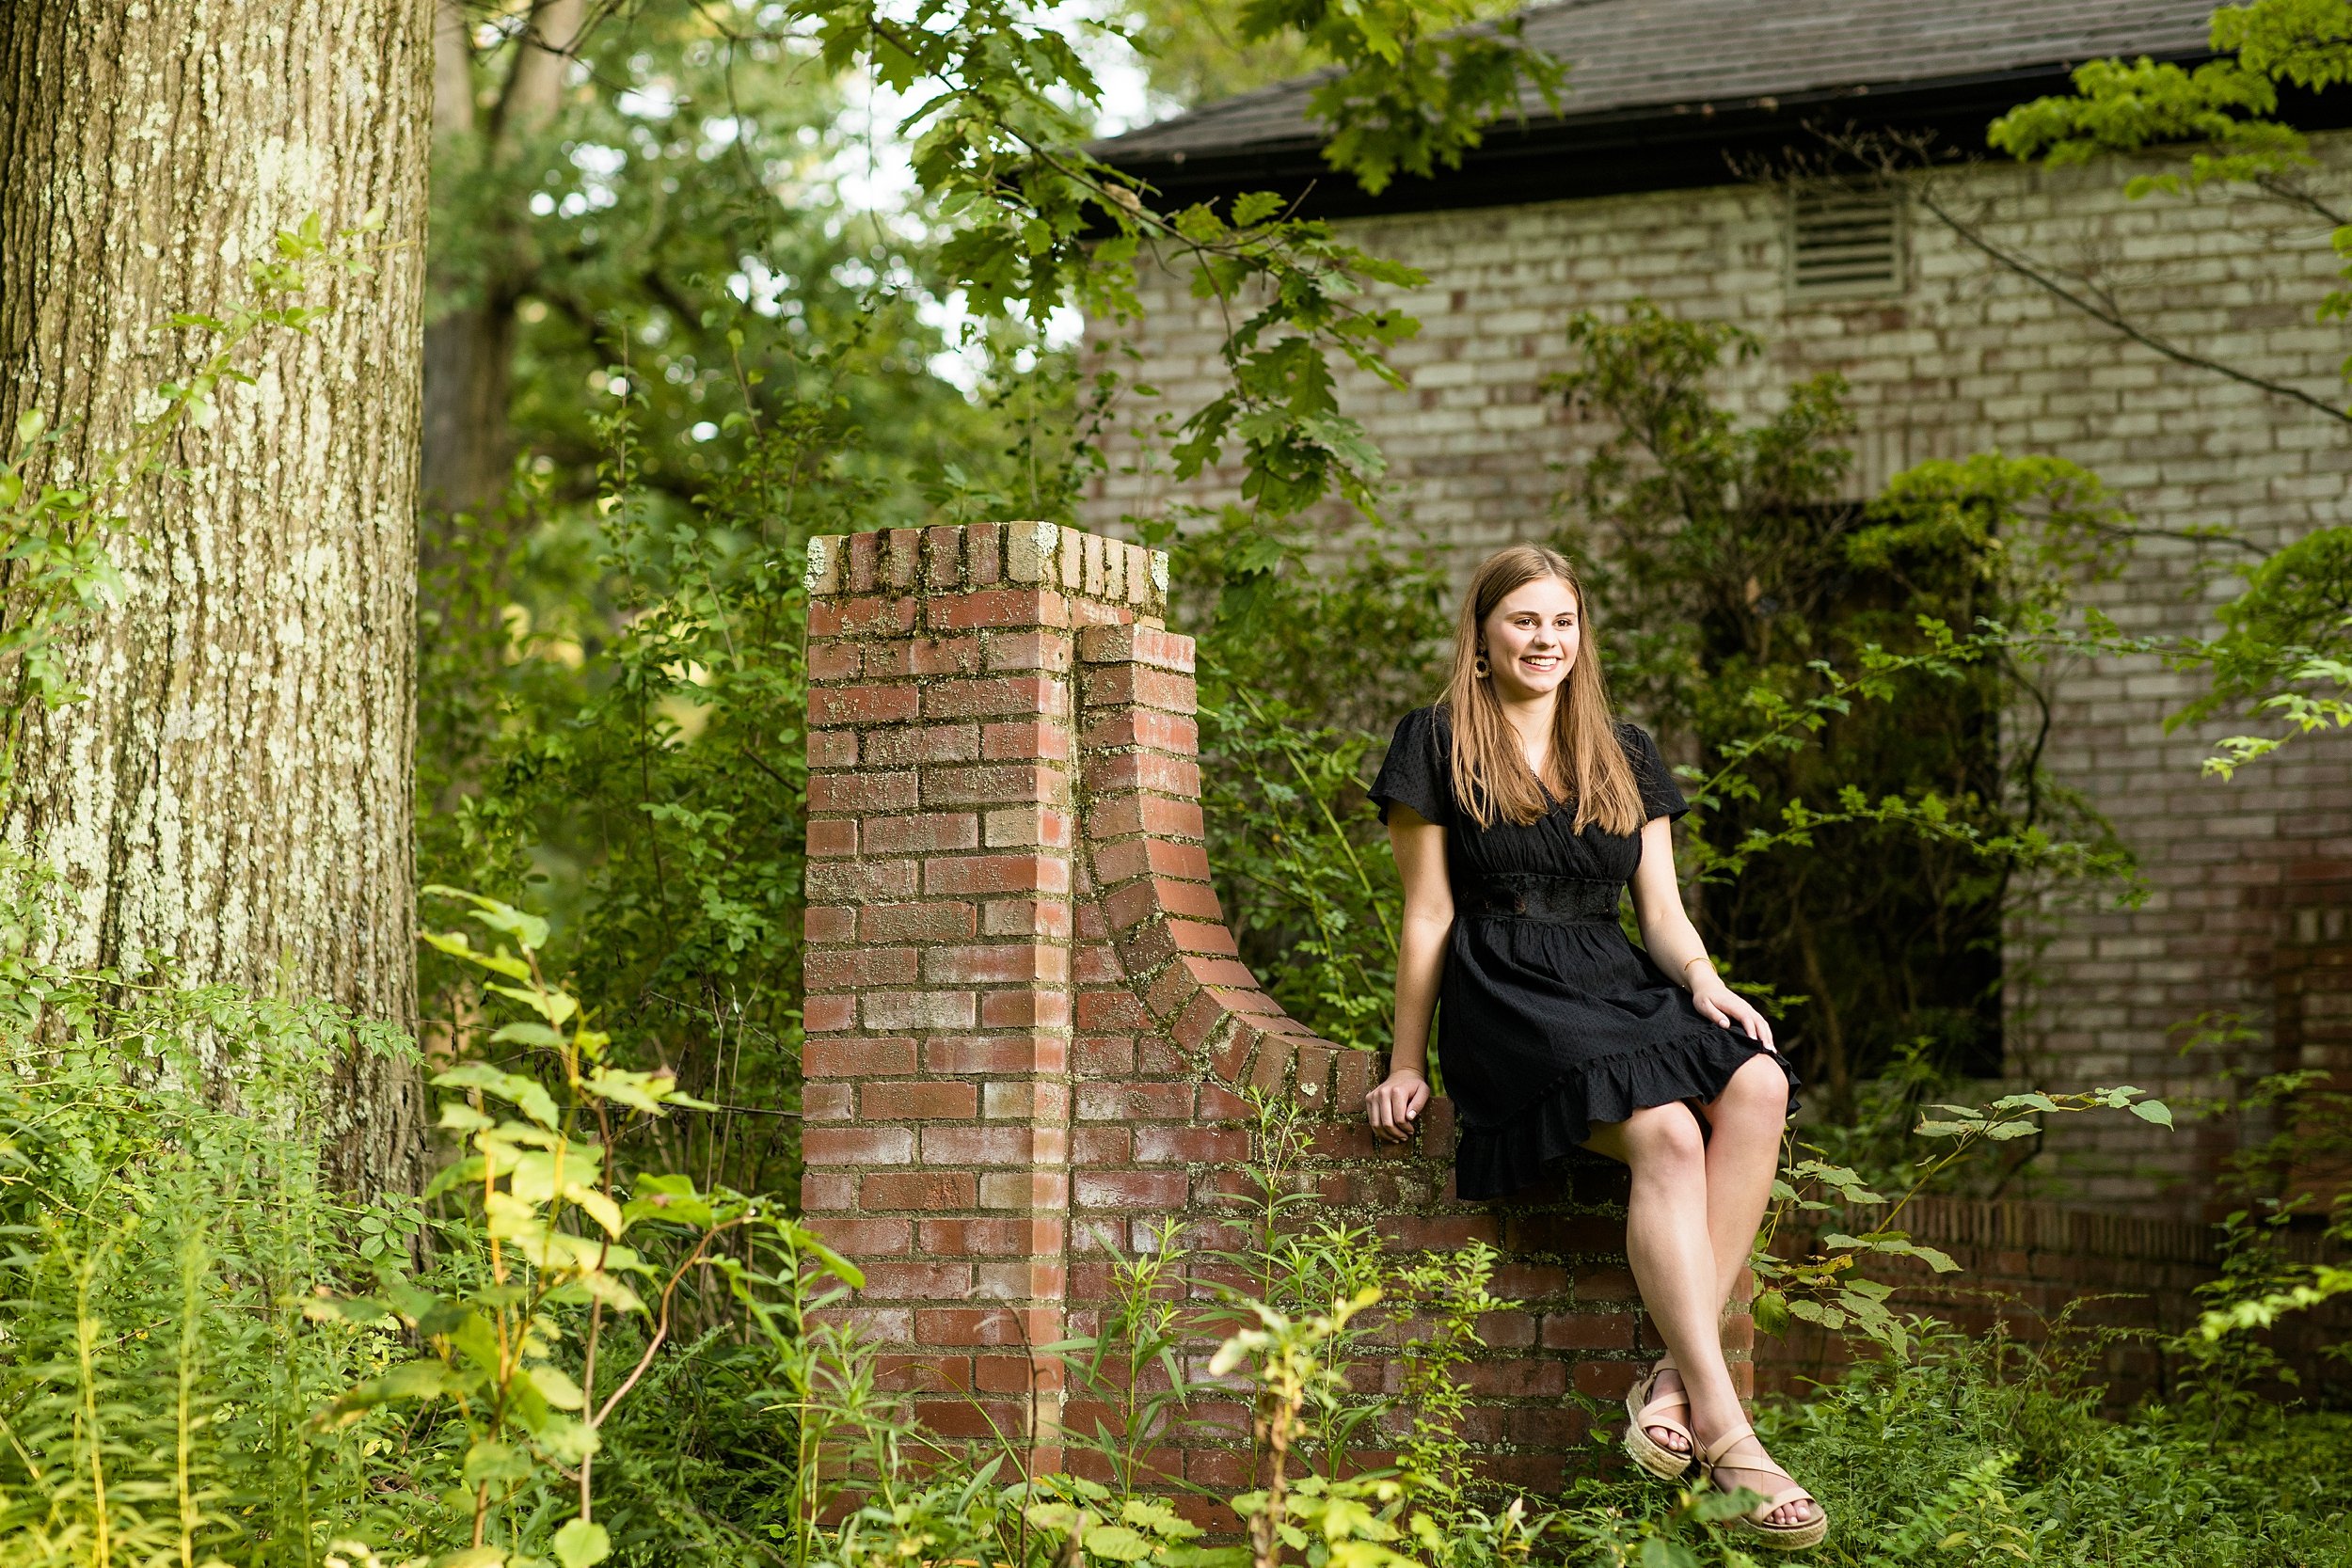 butler county senior photo locations, senior picture location ideas butler county, cranberry township senior photos, zelienople senior photos, mars senior photos, succop nature park senior photos